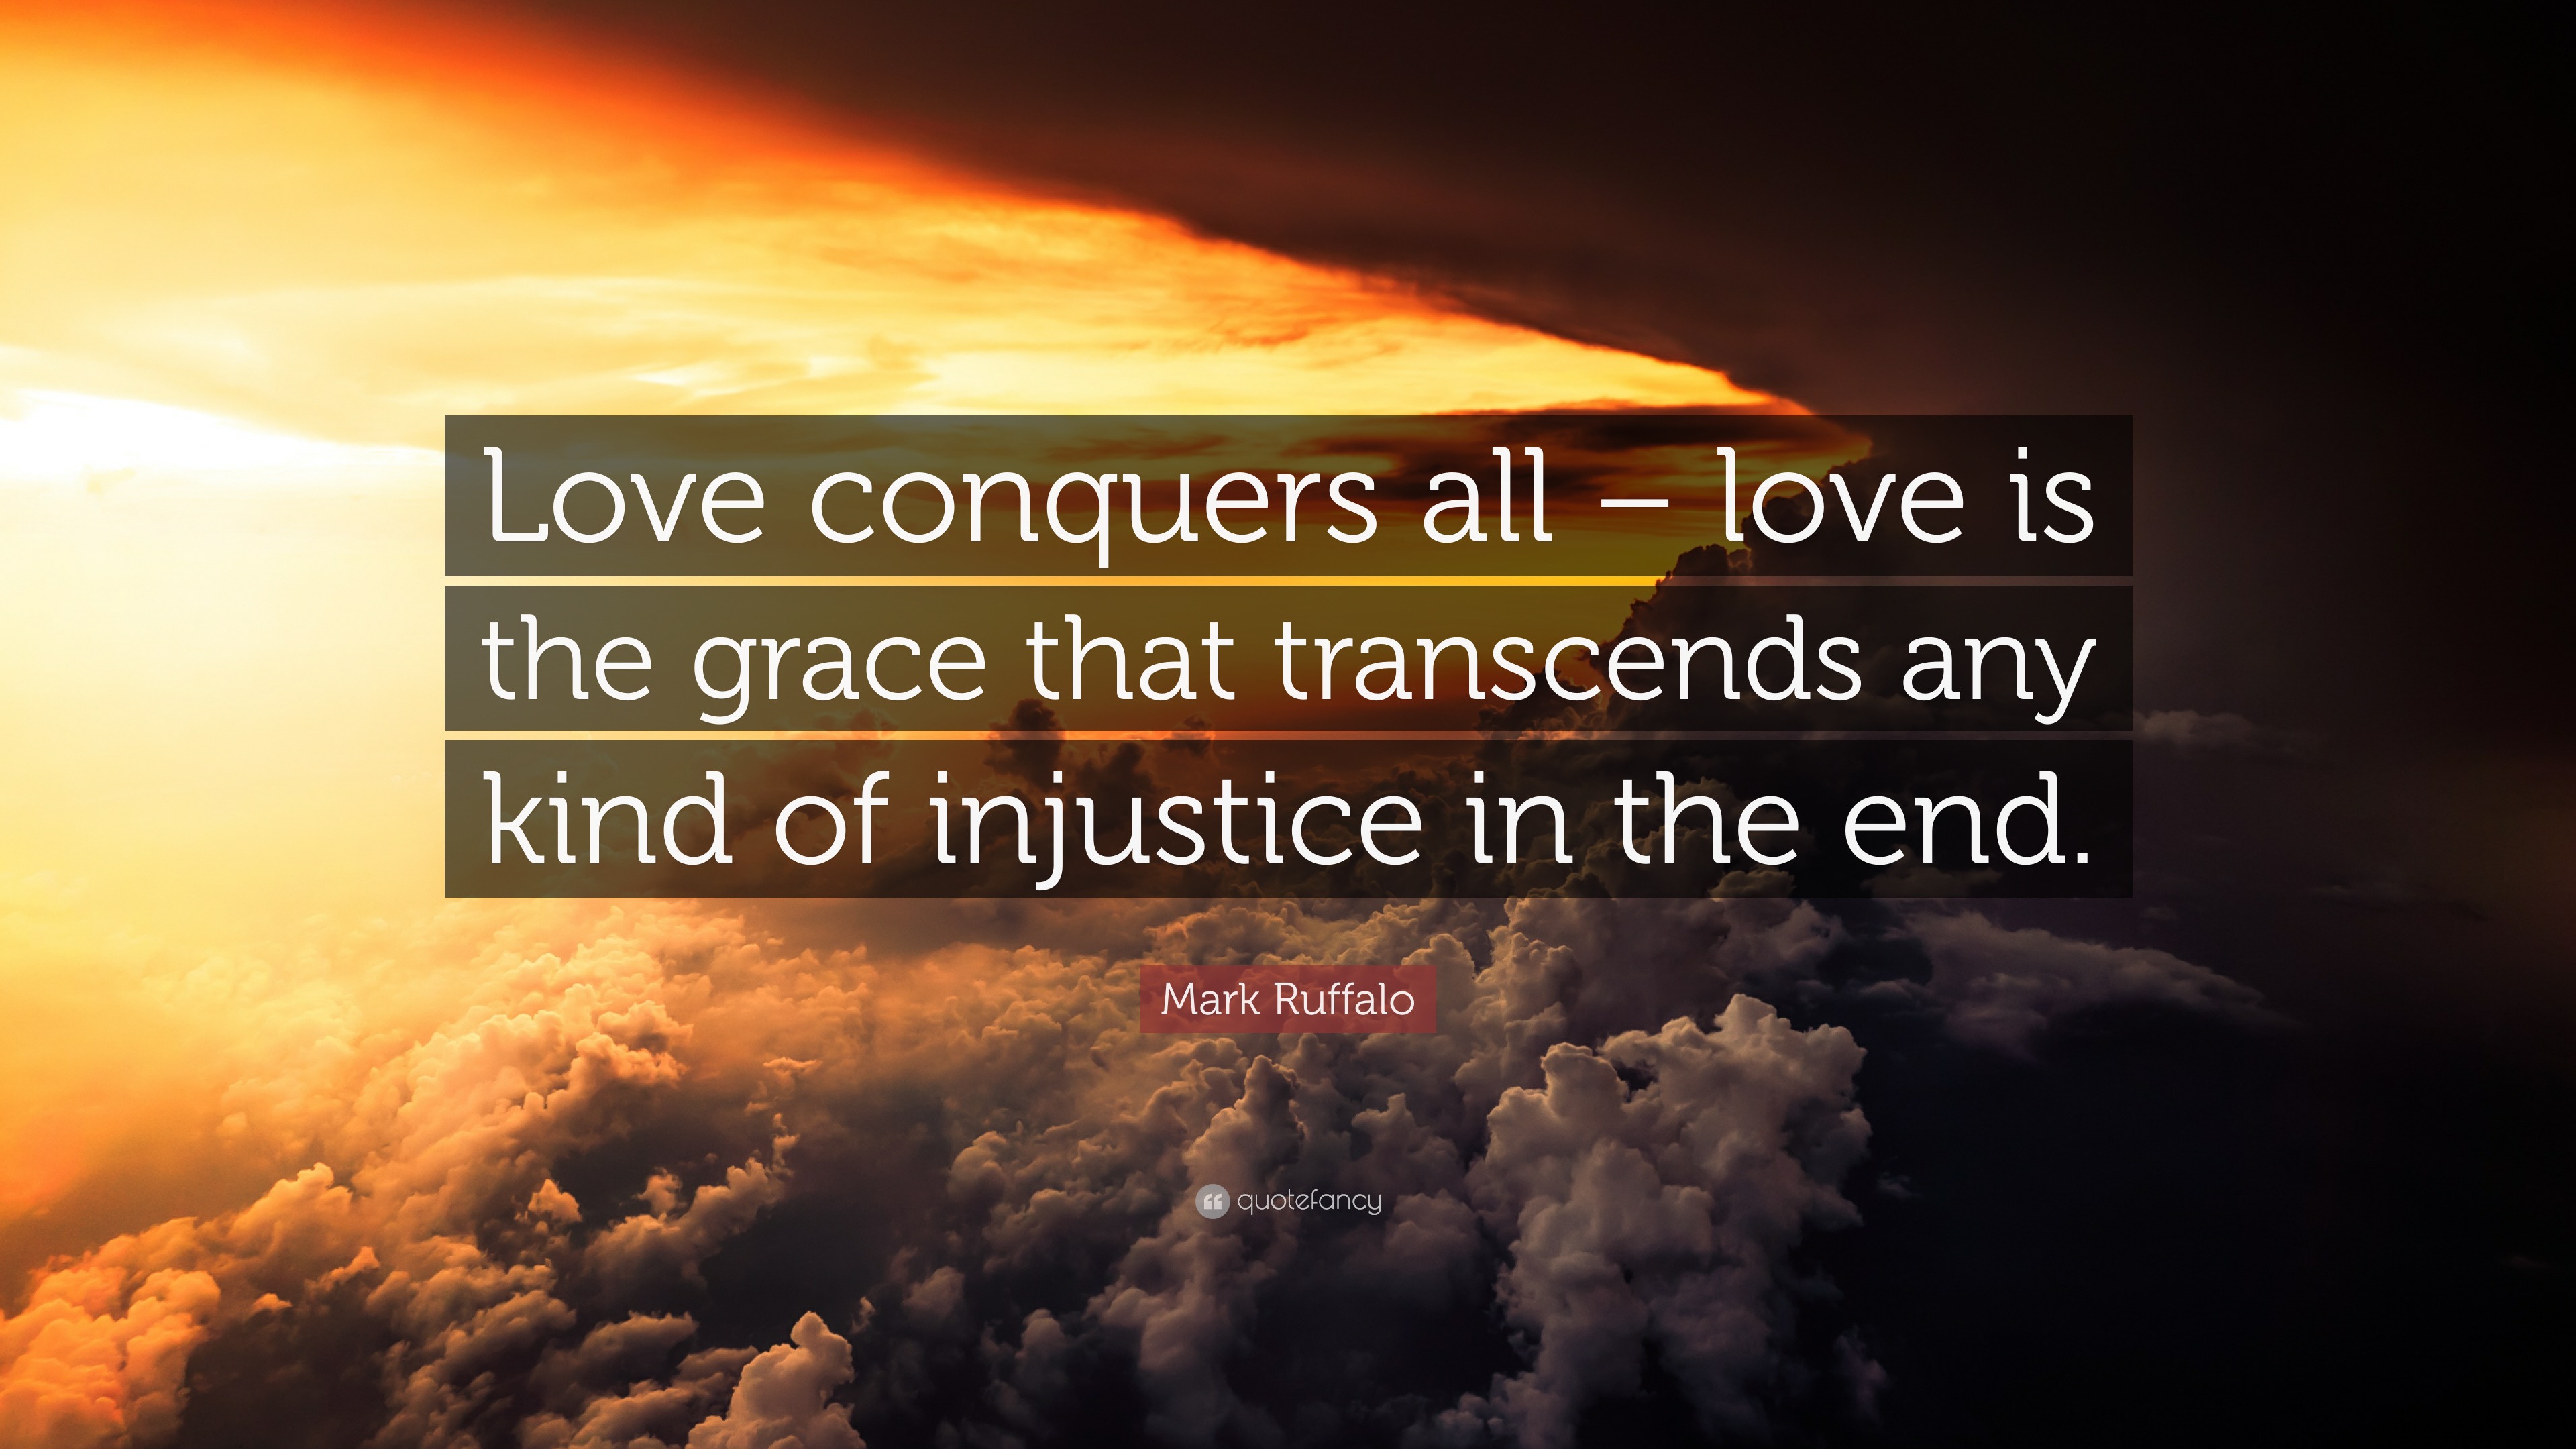 Mark Ruffalo Quote: “Love Conquers All – Love Is The Grace That Transcends Any Kind Of Injustice